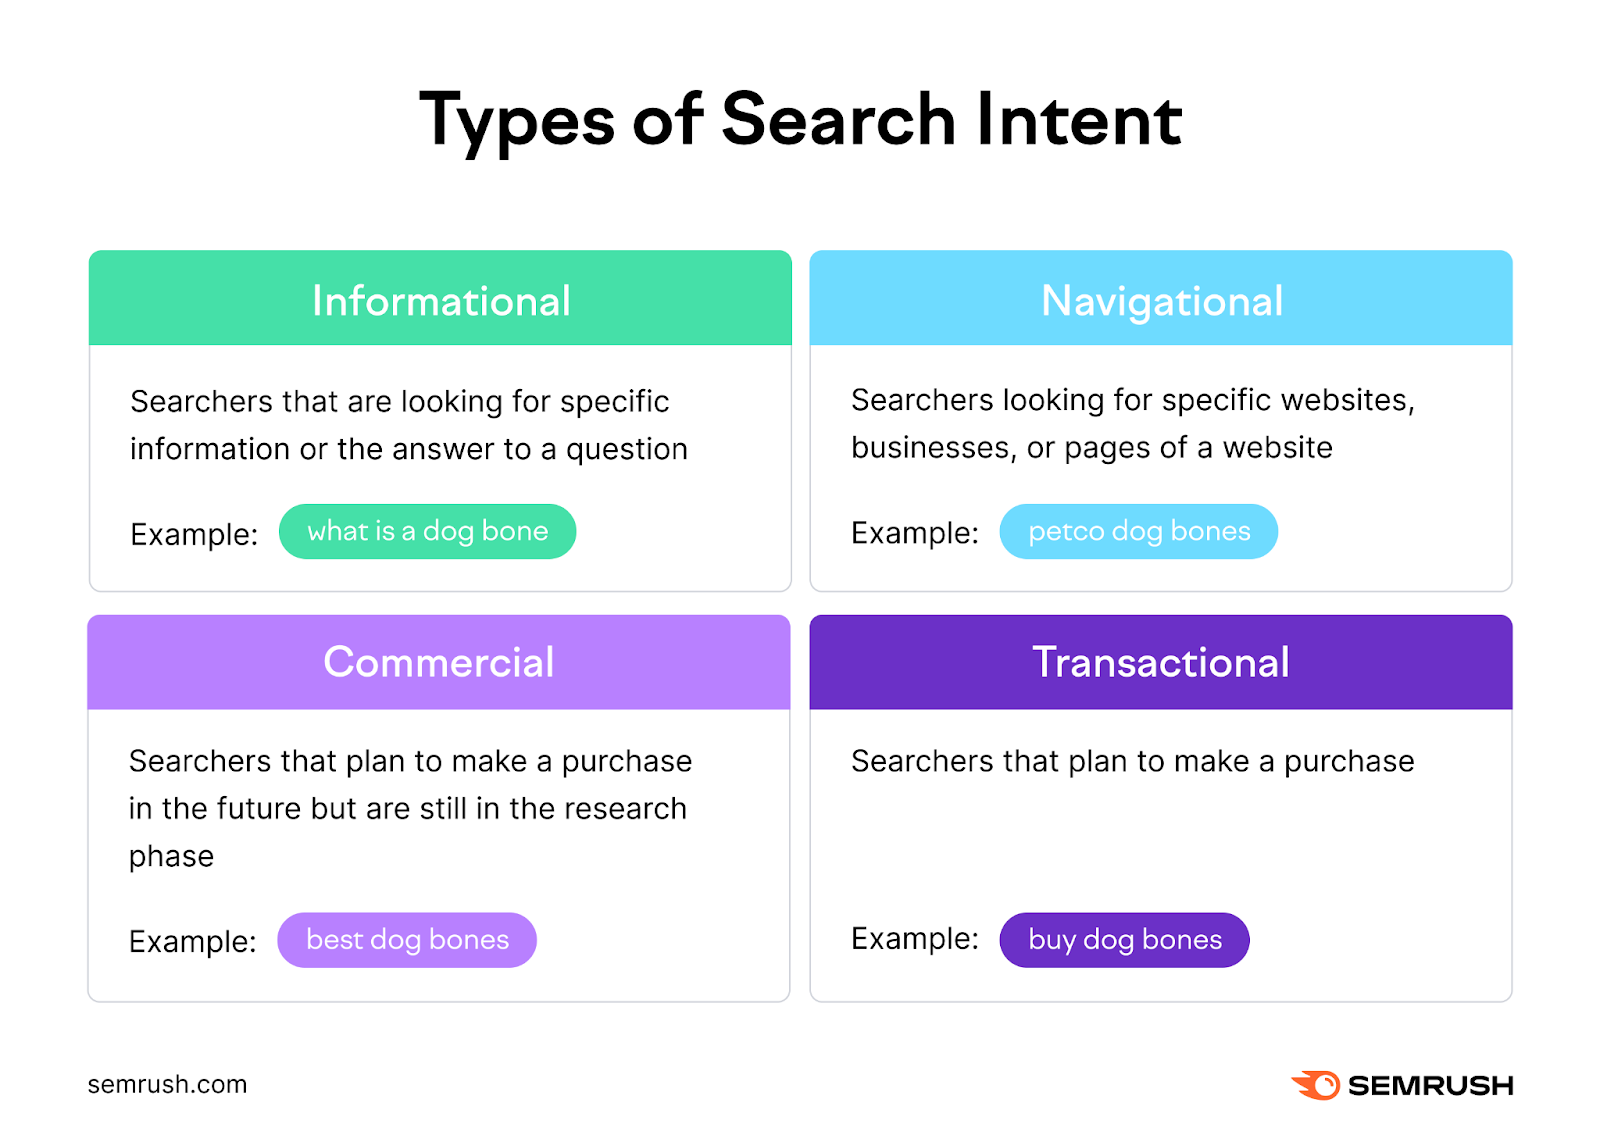 Types of search intent with examples